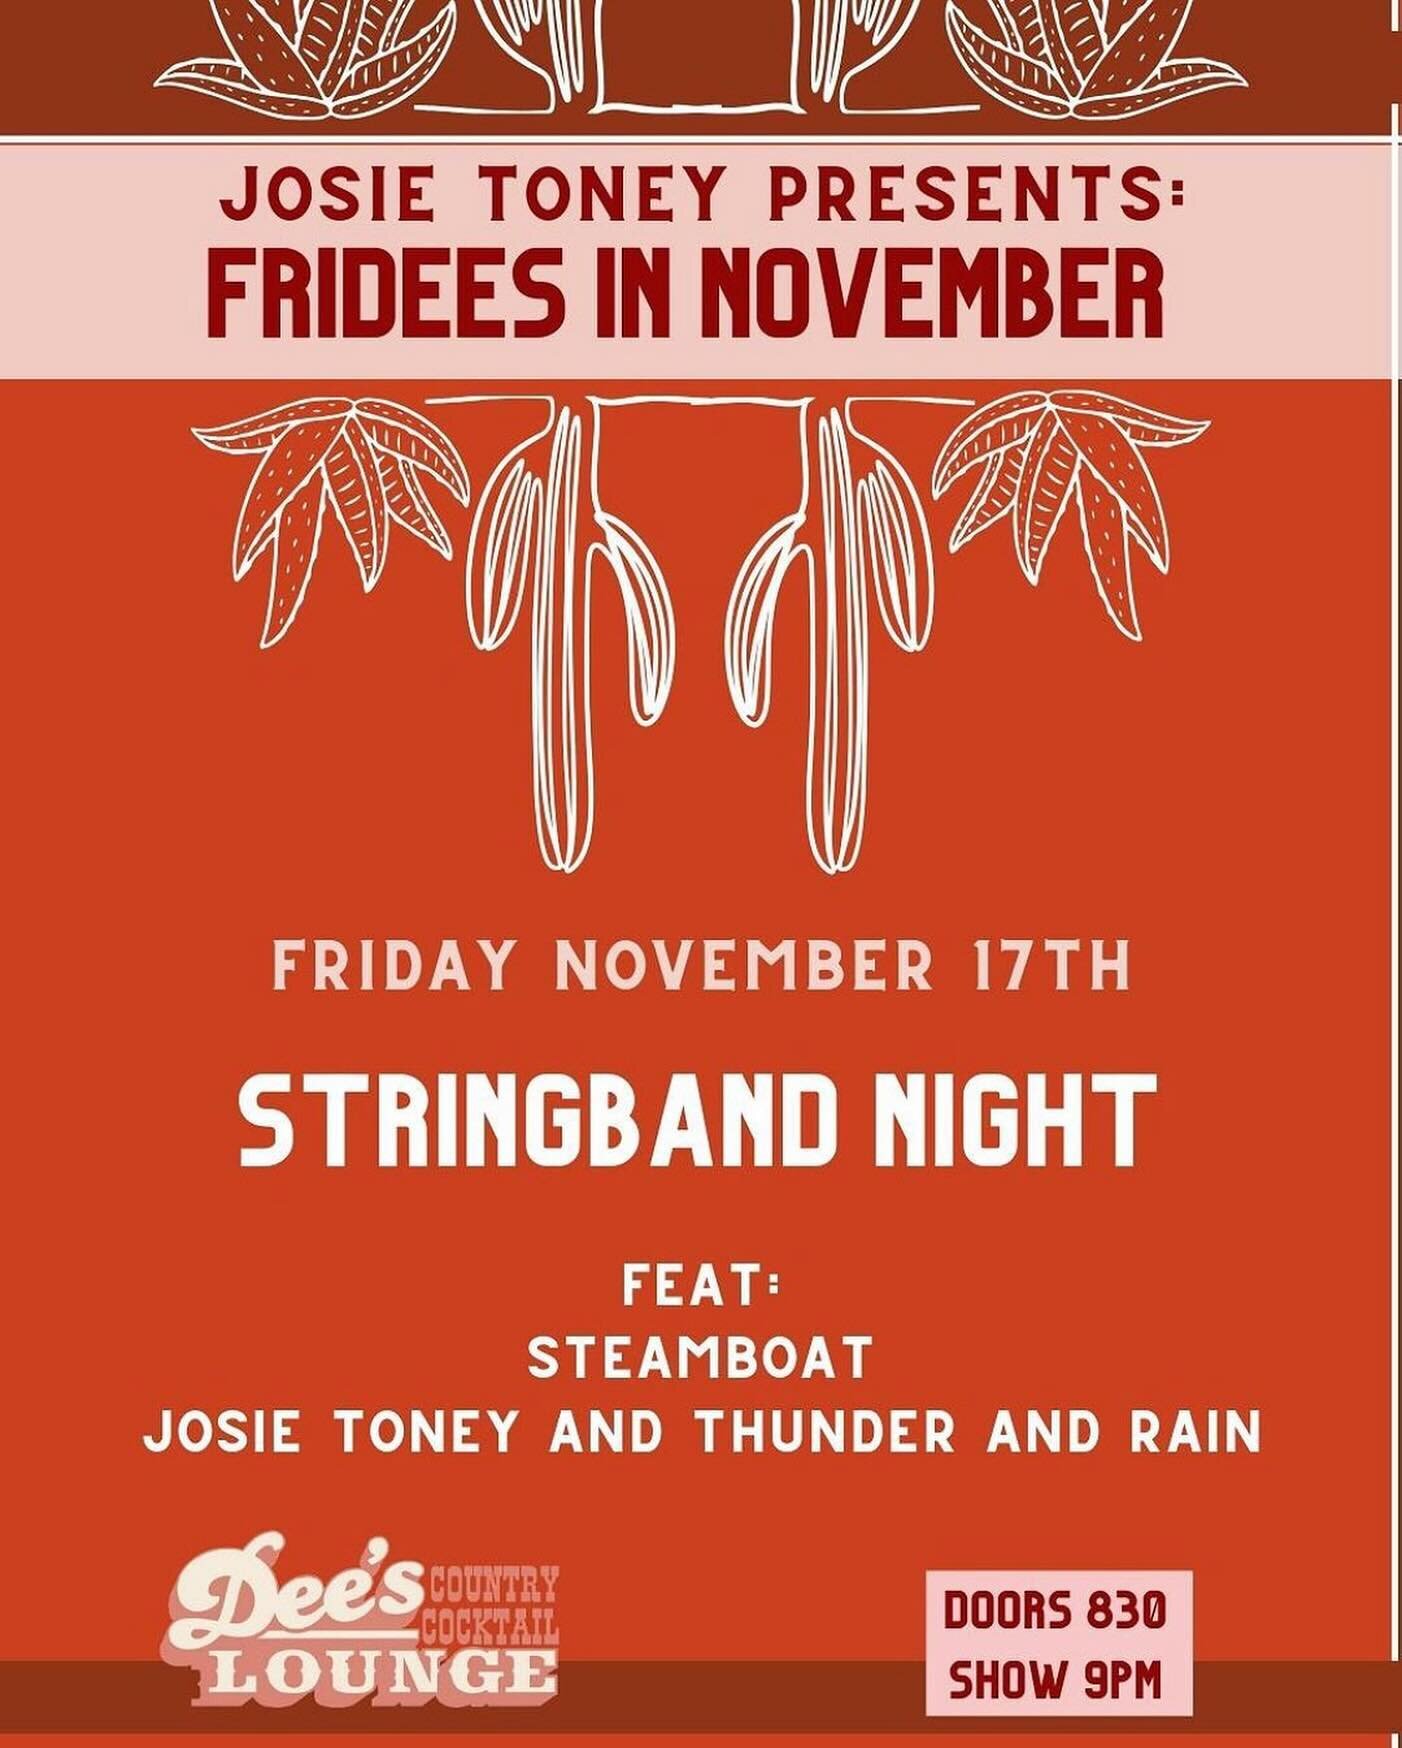 Have you made it out to @deeslounge615 to see @josierigatoni and her Fridee night specials? Come through tomorrow for Stringband Night and see what you&rsquo;ve been missing